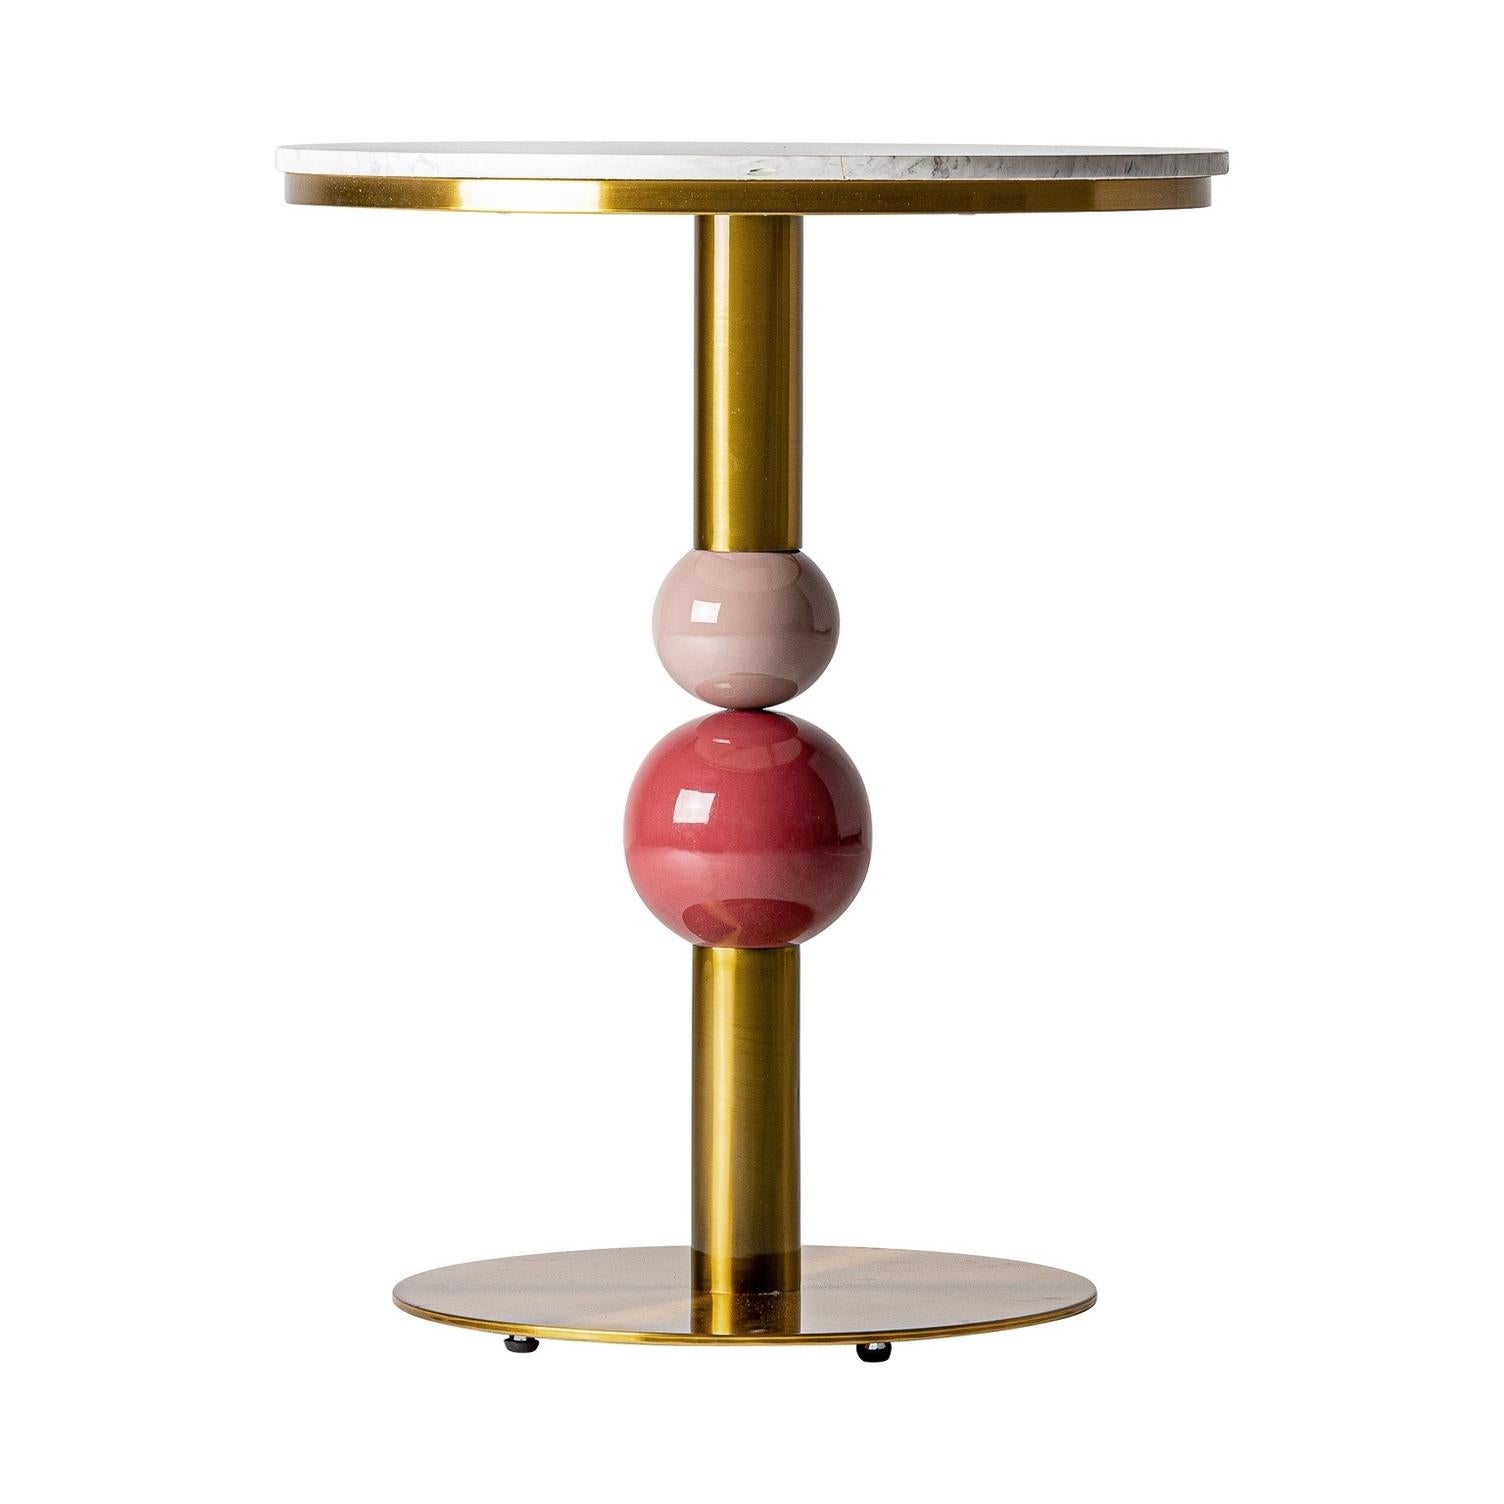 Italian design style round pedestal table consisting of a graphic gilded metal foot with a round white marble tray adorned with powdery pink touches!